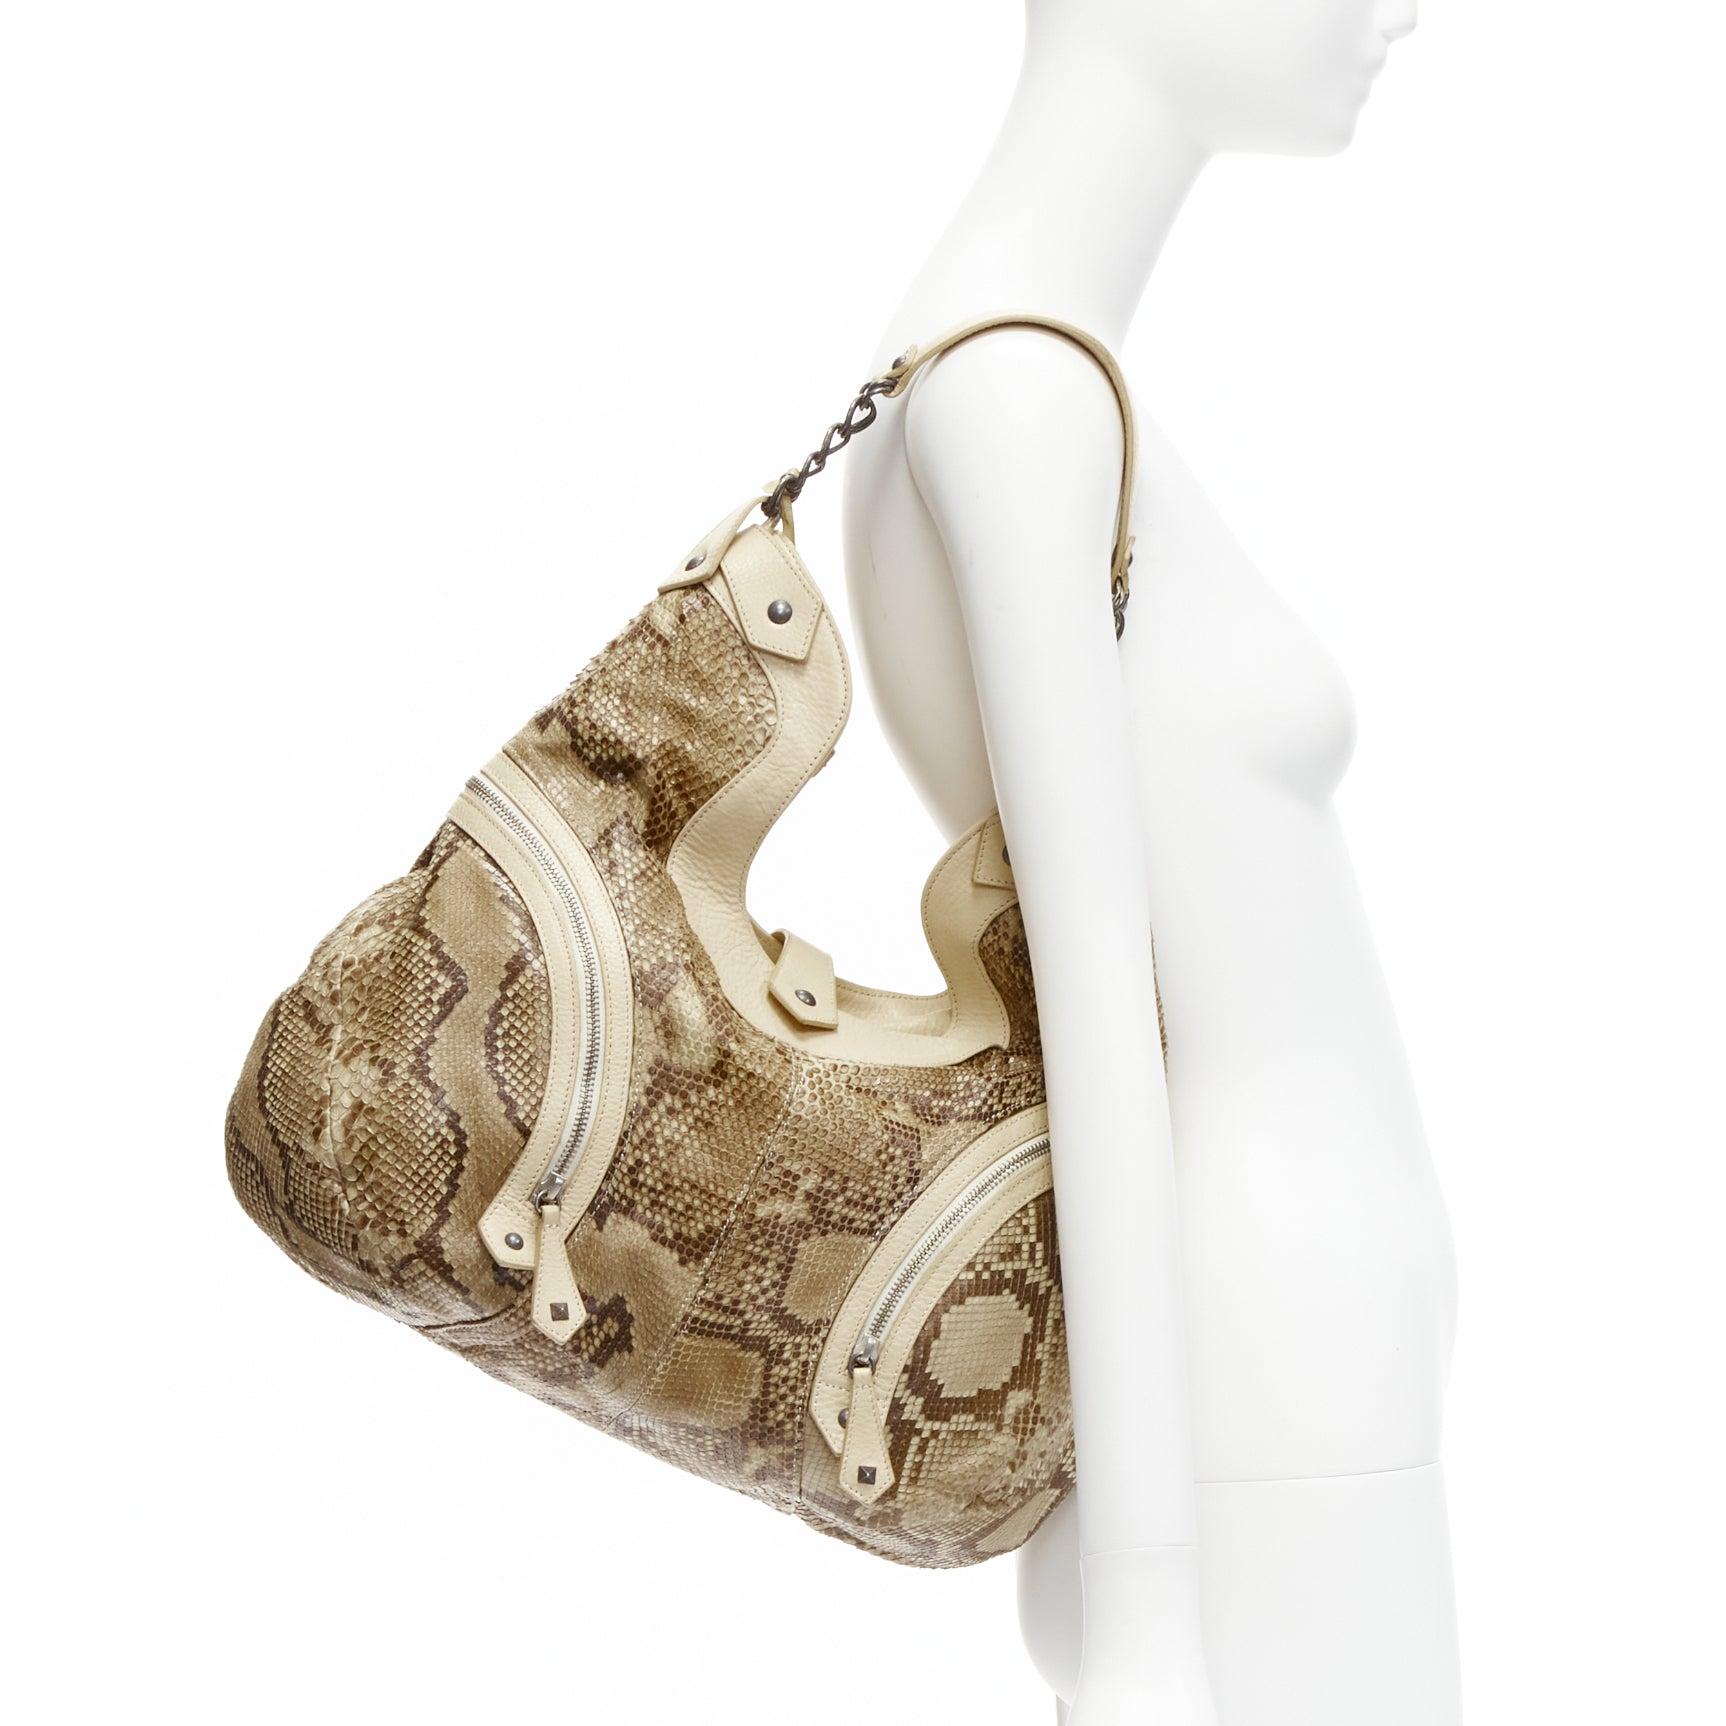 CHRISTIAN LOUBOUTIN beige khaki scaled leather biker zip chain hobo bag
Reference: TGAS/D00550
Brand: Christian Louboutin
Material: Leather
Color: Beige, Khaki
Pattern: Animal Print
Closure: Zip
Lining: Red Fabric
Made in: